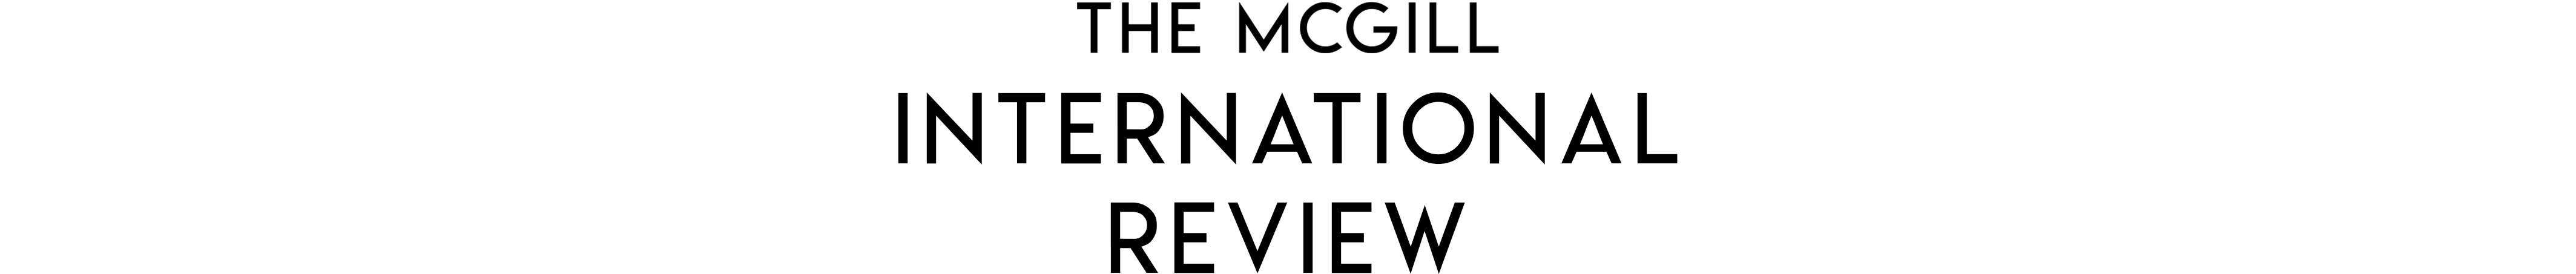 The McGill International Review